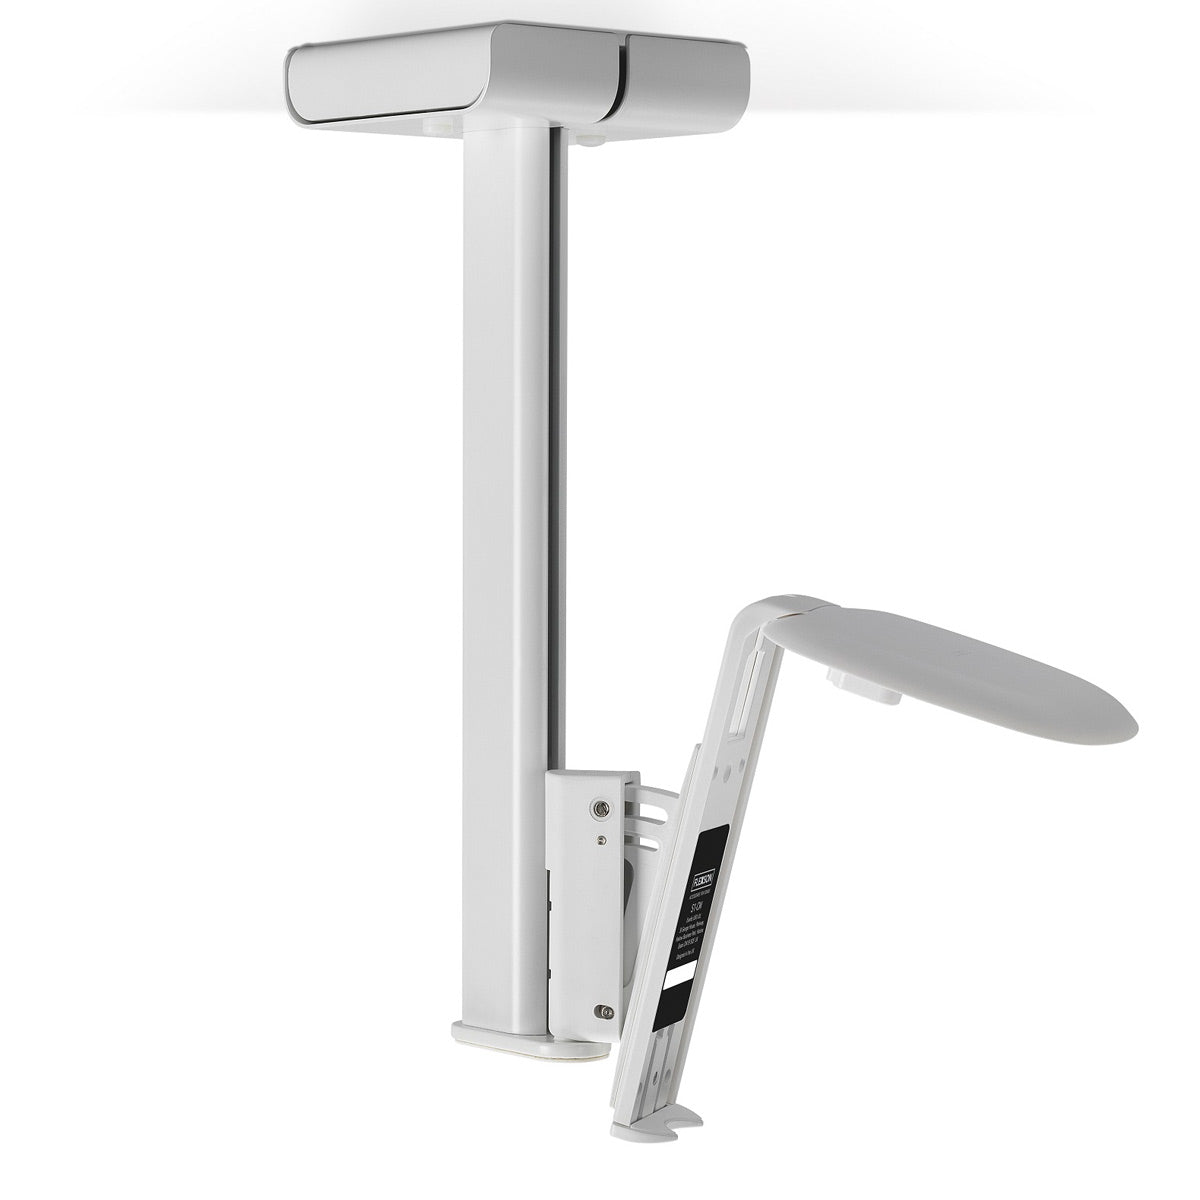 Flexson Ceiling Mount for Sonos One or PLAY:1 (White)